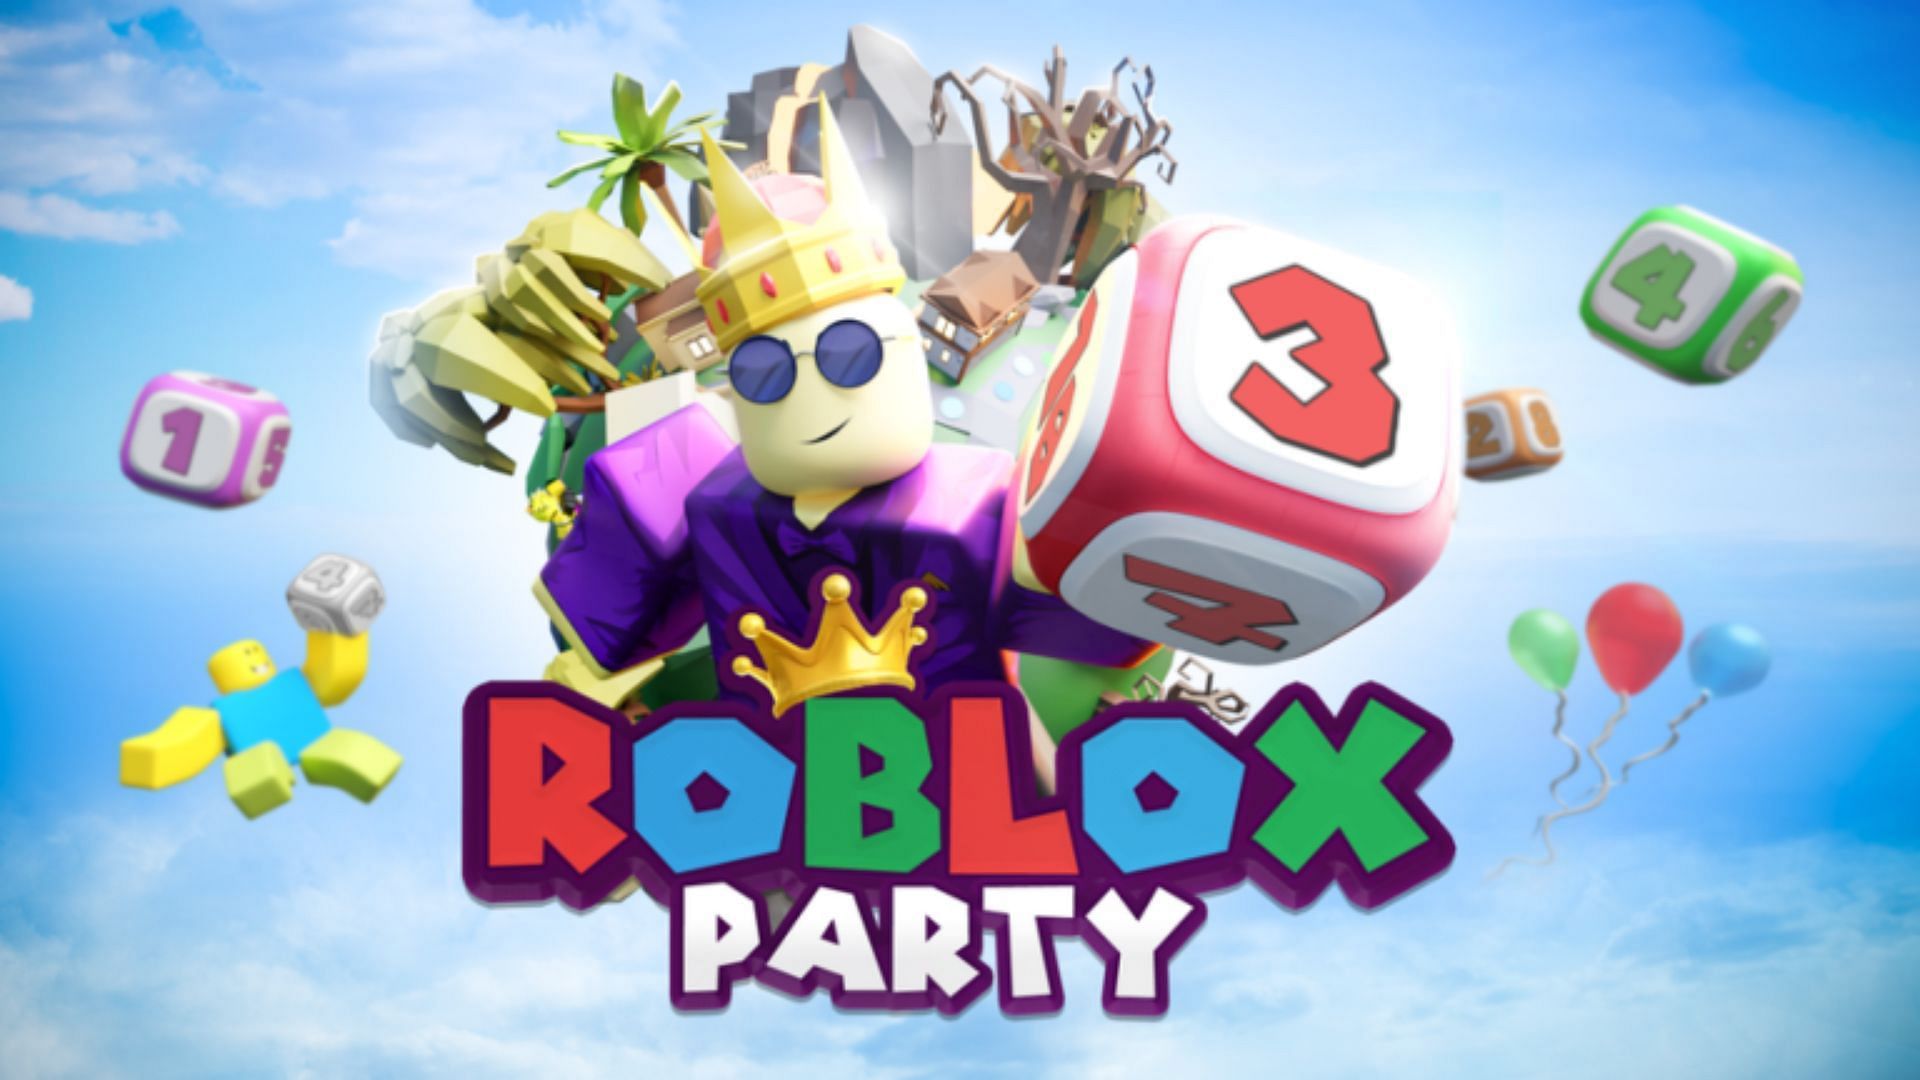 Codes for Roblox Party and their importance (Image via Roblox)